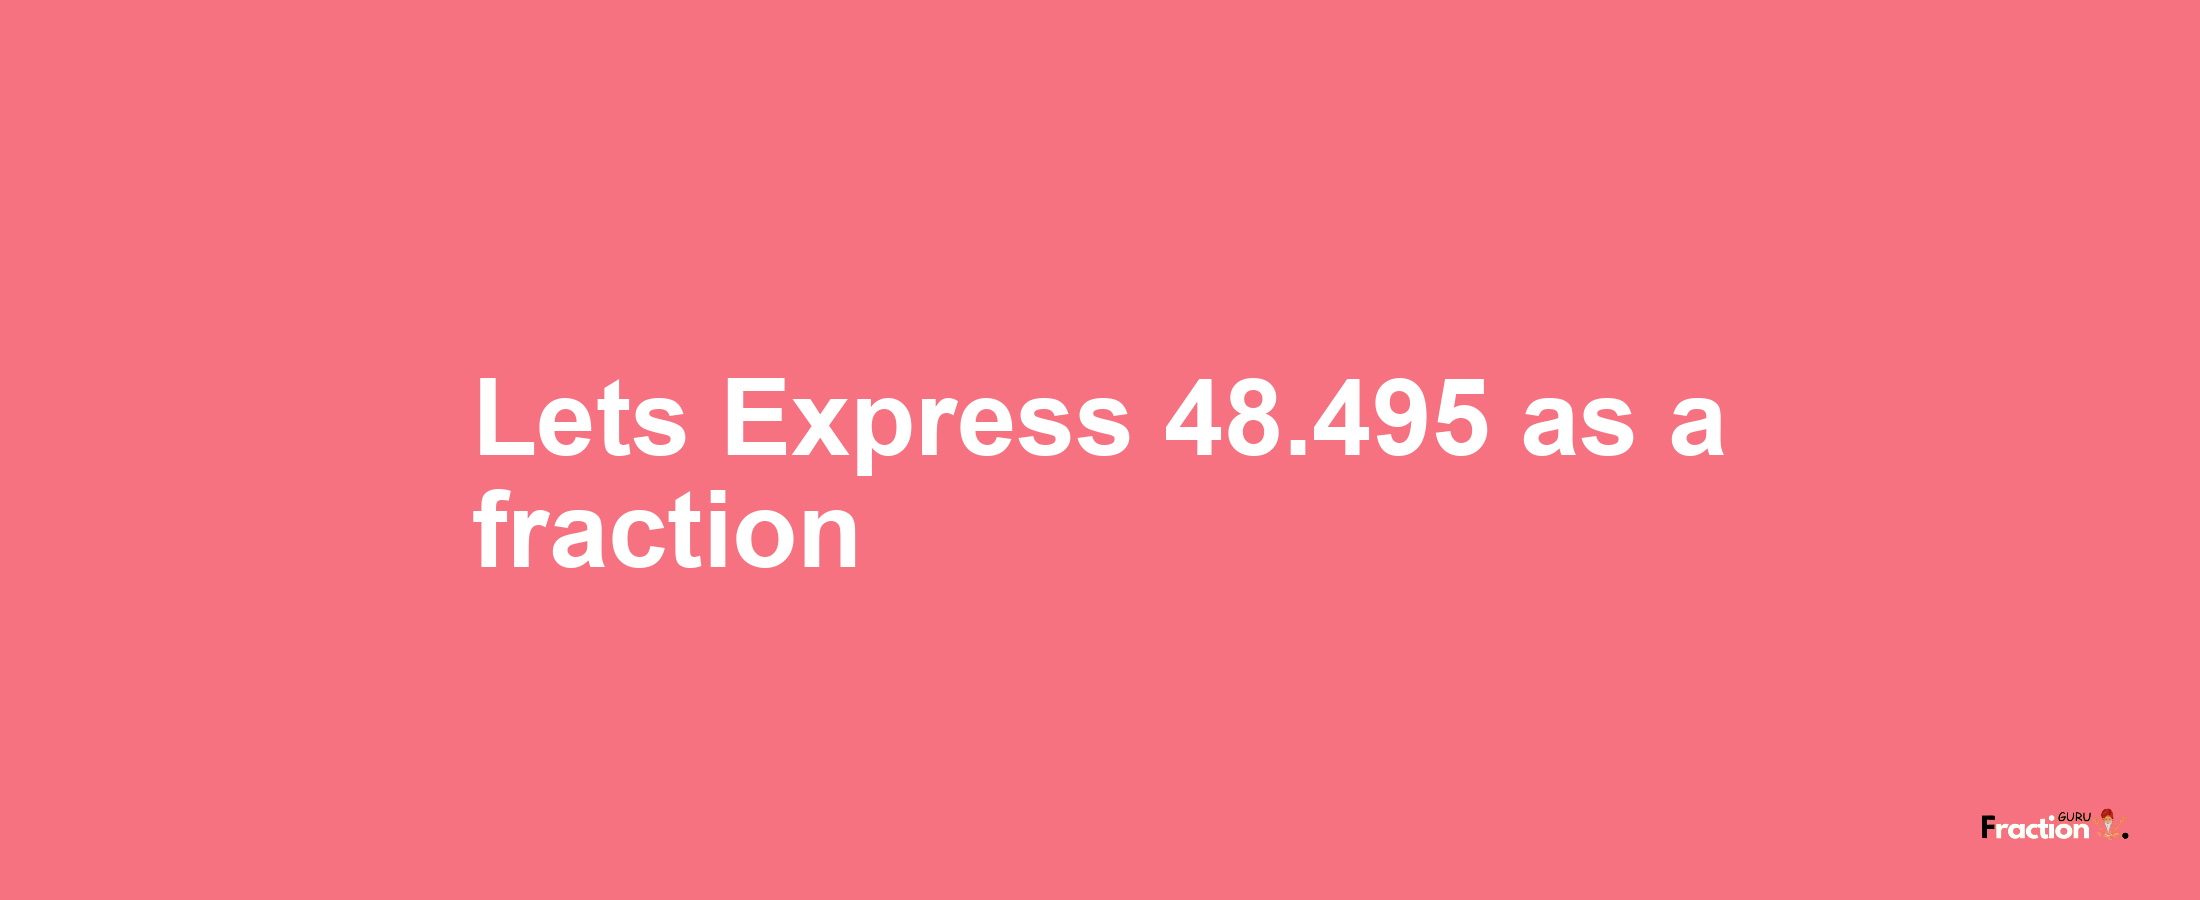 Lets Express 48.495 as afraction